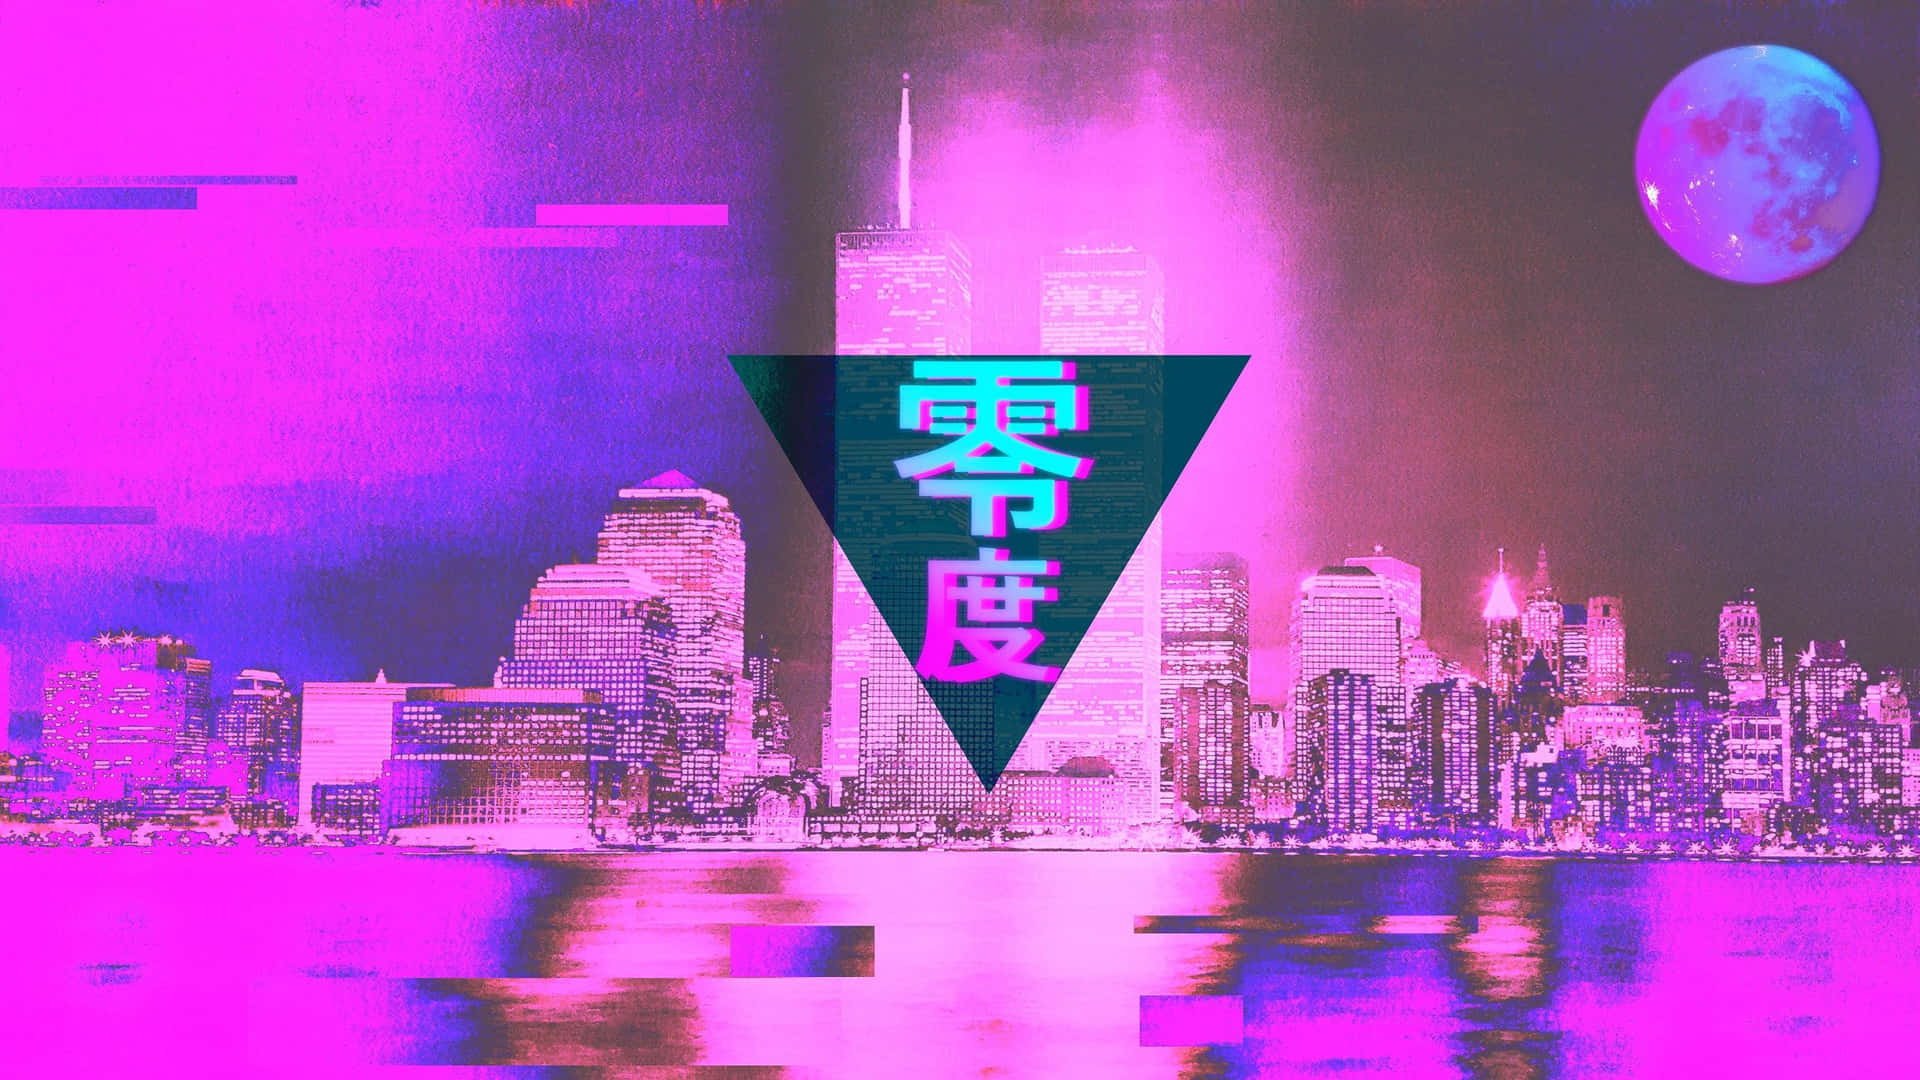 A Pink And Purple Cityscape With The Words